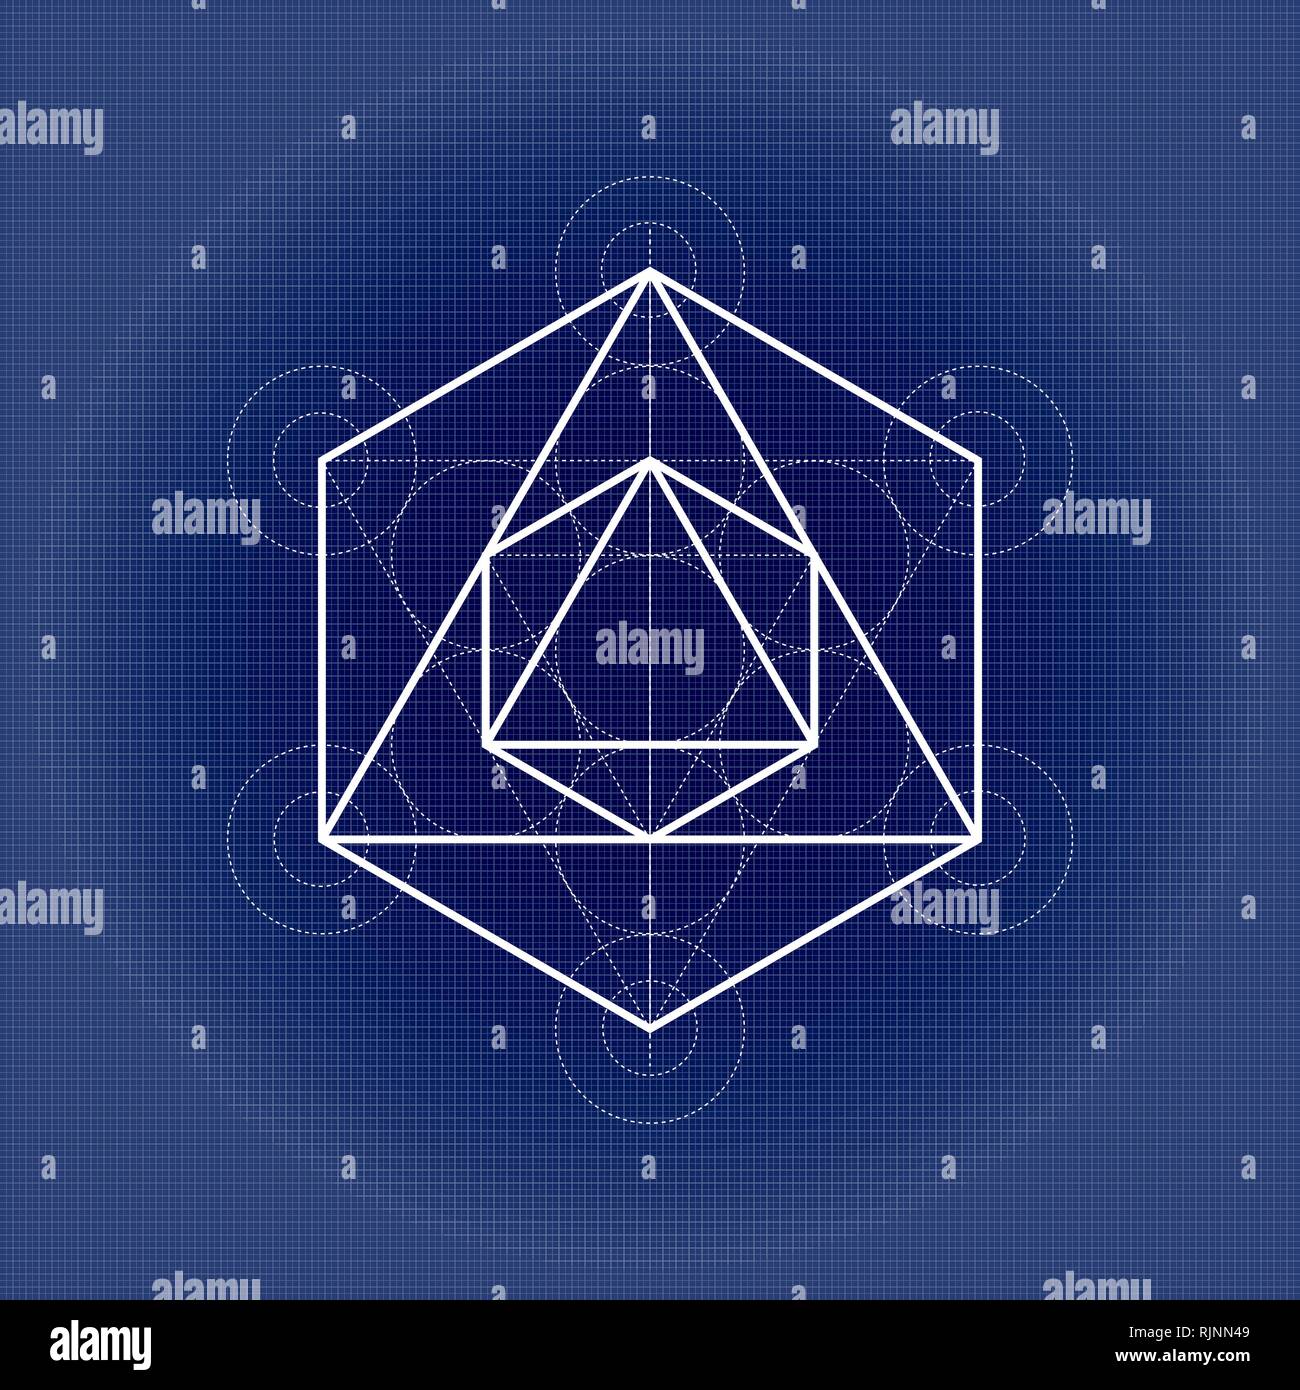 Octahedron from Metatrons cube, sacred geometry illustration on technical paper Stock Vector